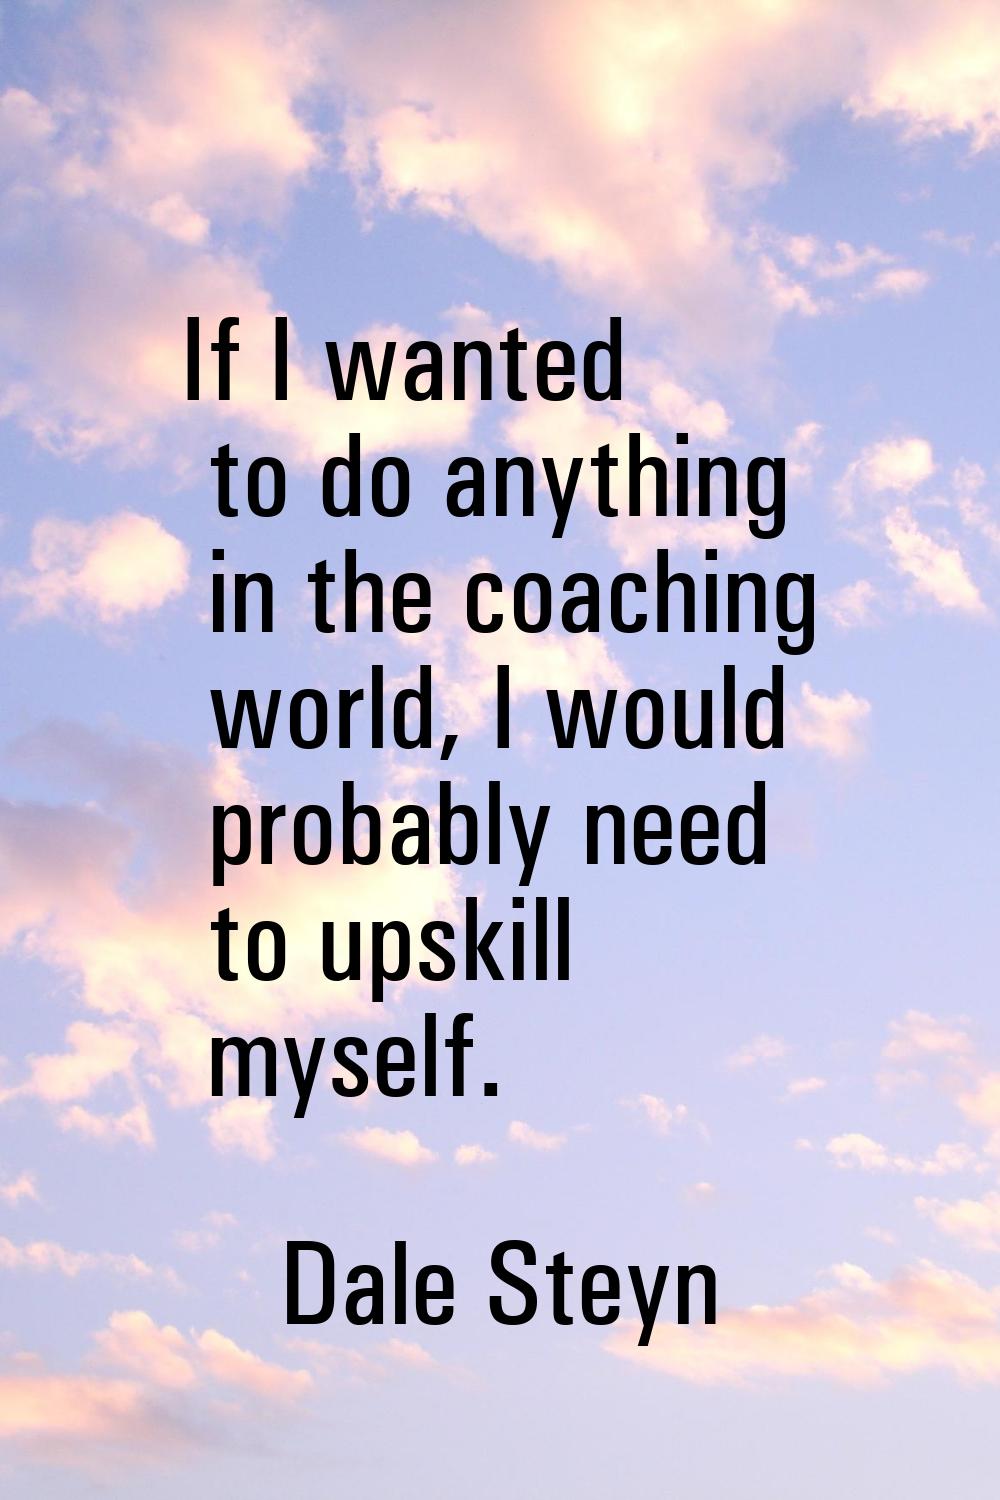 If I wanted to do anything in the coaching world, I would probably need to upskill myself.